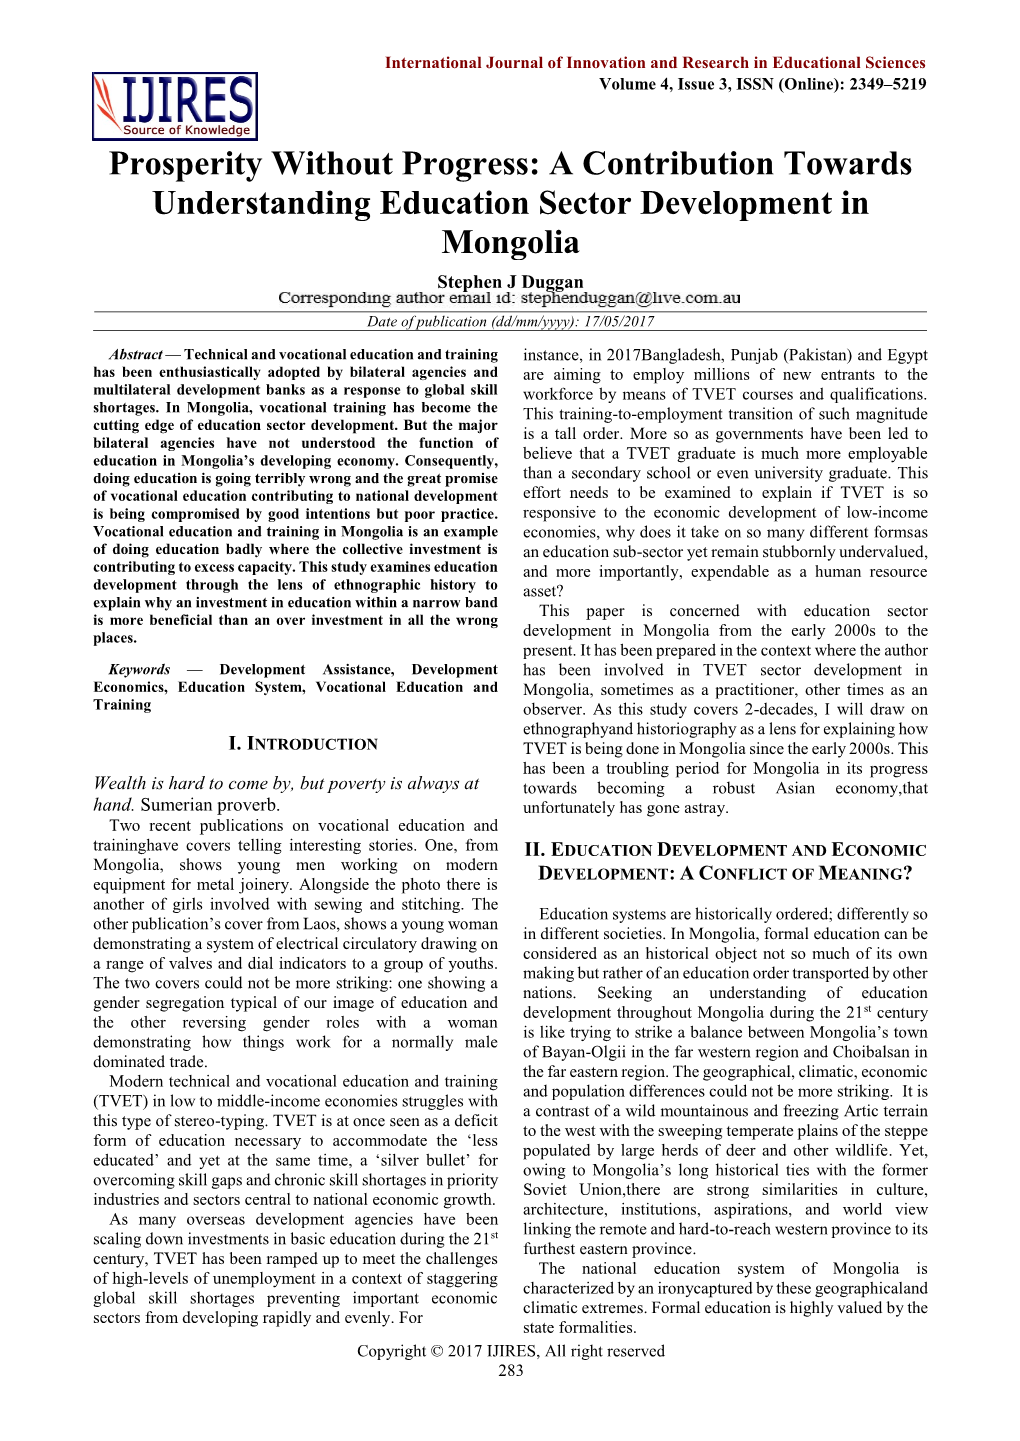 A Contribution Towards Understanding Education Sector Development in Mongolia